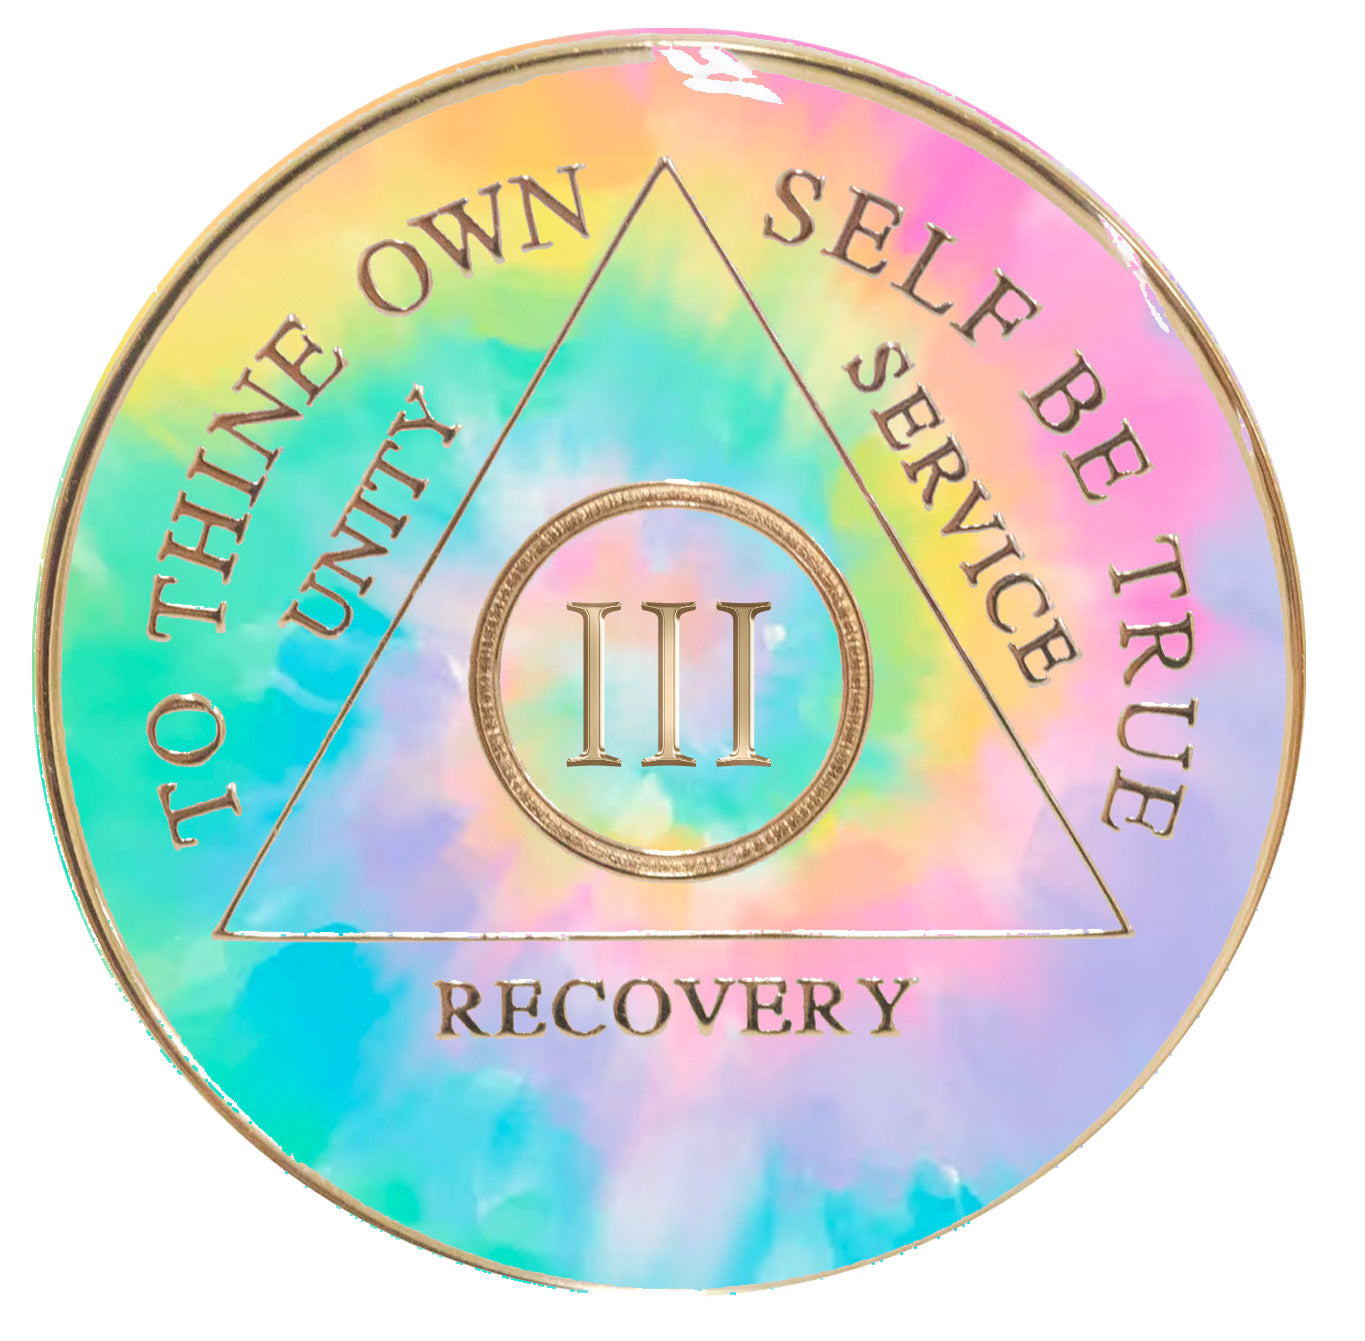 3 year AA psychic-delic change medallion is tie-dye in soft pink, yellow, purple, and blues with the circle, triangle, roman numeral, unity, service, recovery, and to thine own self be true embossed in 14k gold, and the tie-dye representing change.